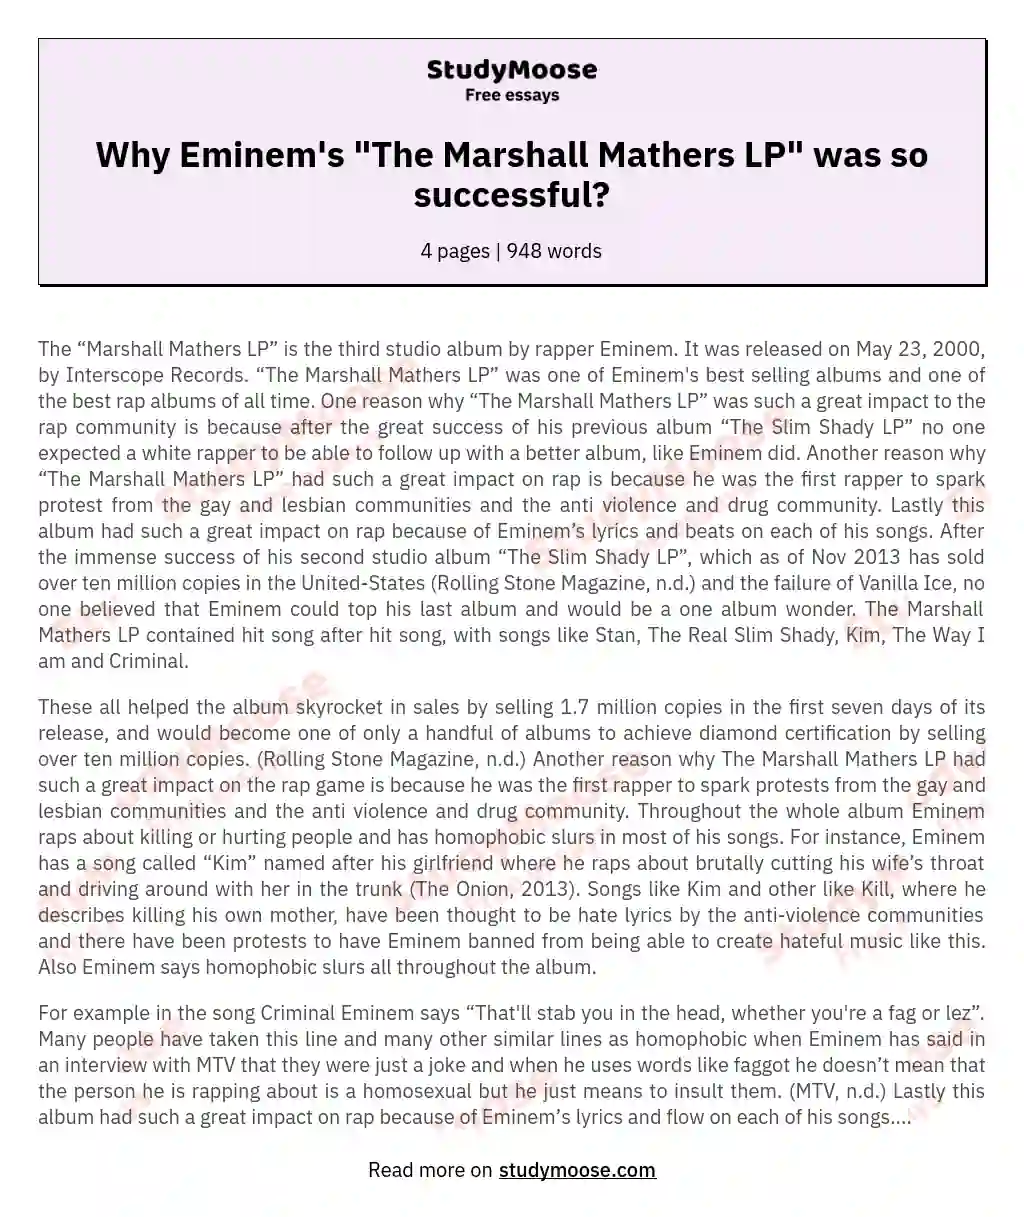 Why Eminem's "The Marshall Mathers LP" was so successful?